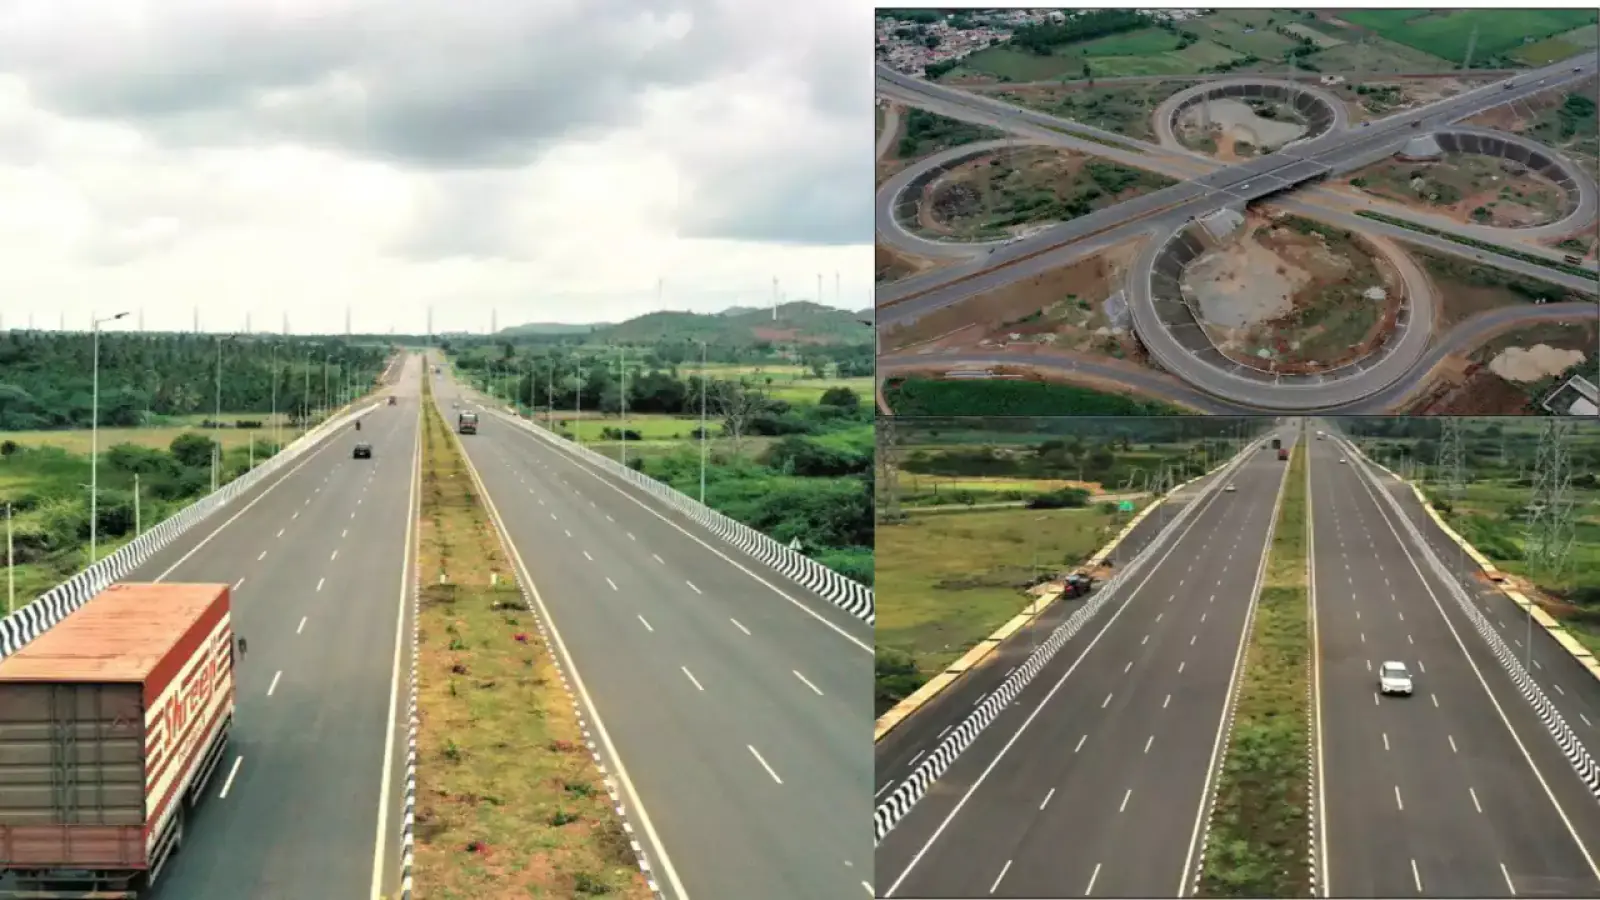 Travel time between Mumbai-Bangalore will be reduced, Gadkari shared pictures of new 6-lane highway